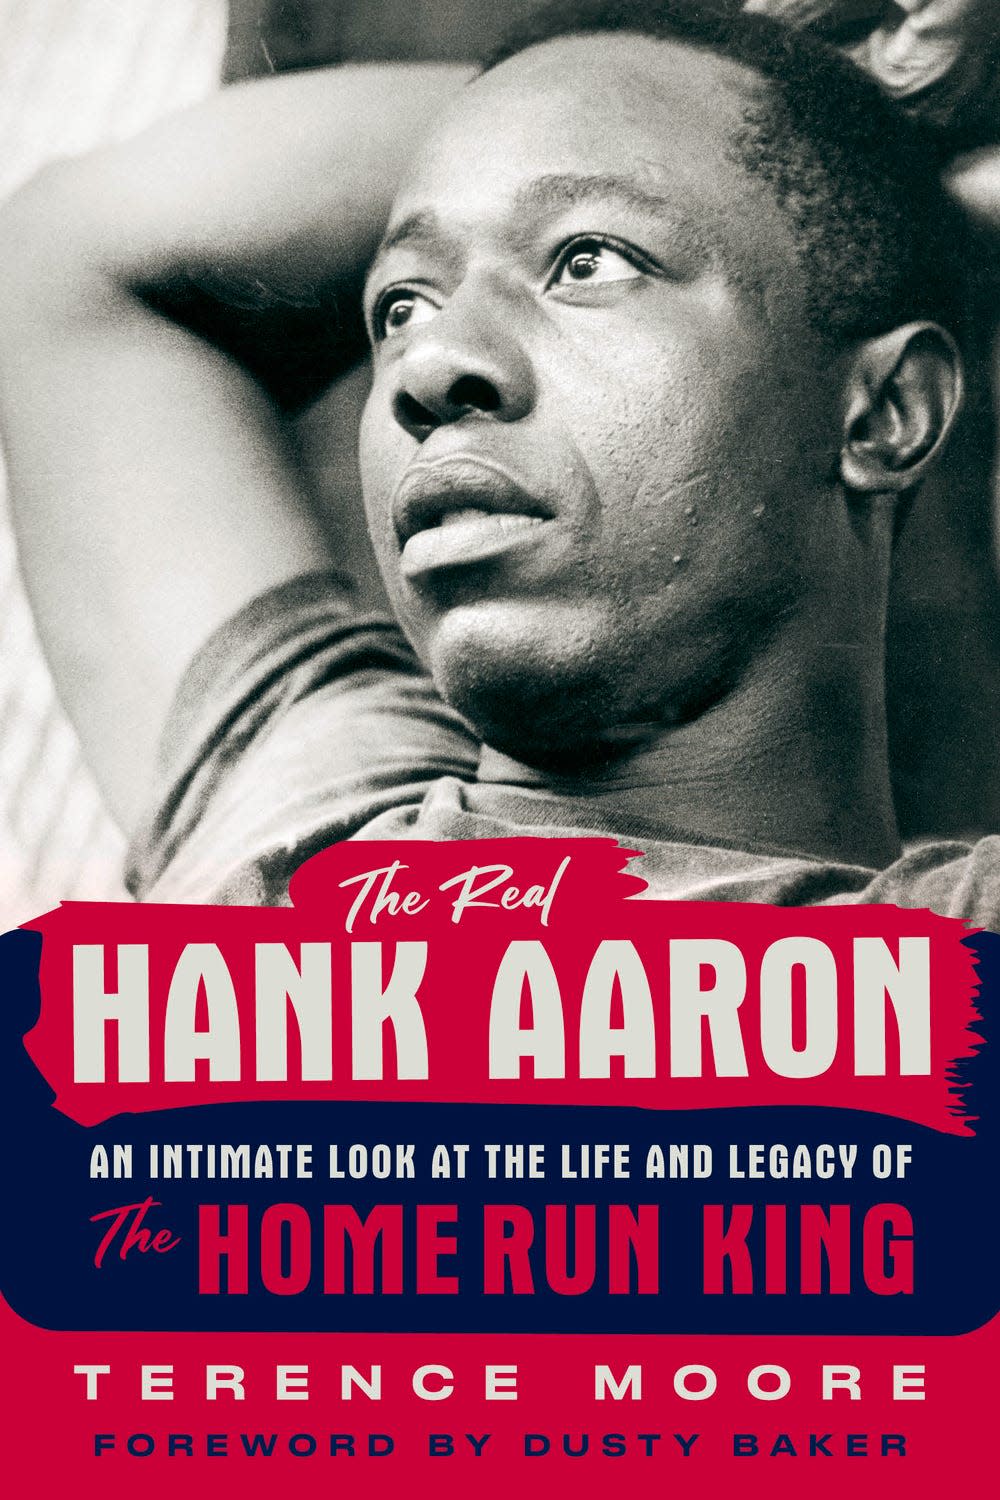 "The Real Hank Aaron," published by Triumph Books, chronicles the life of the baseball legend as told by a close confidante and former Milwaukeean himself, Terence Moore.